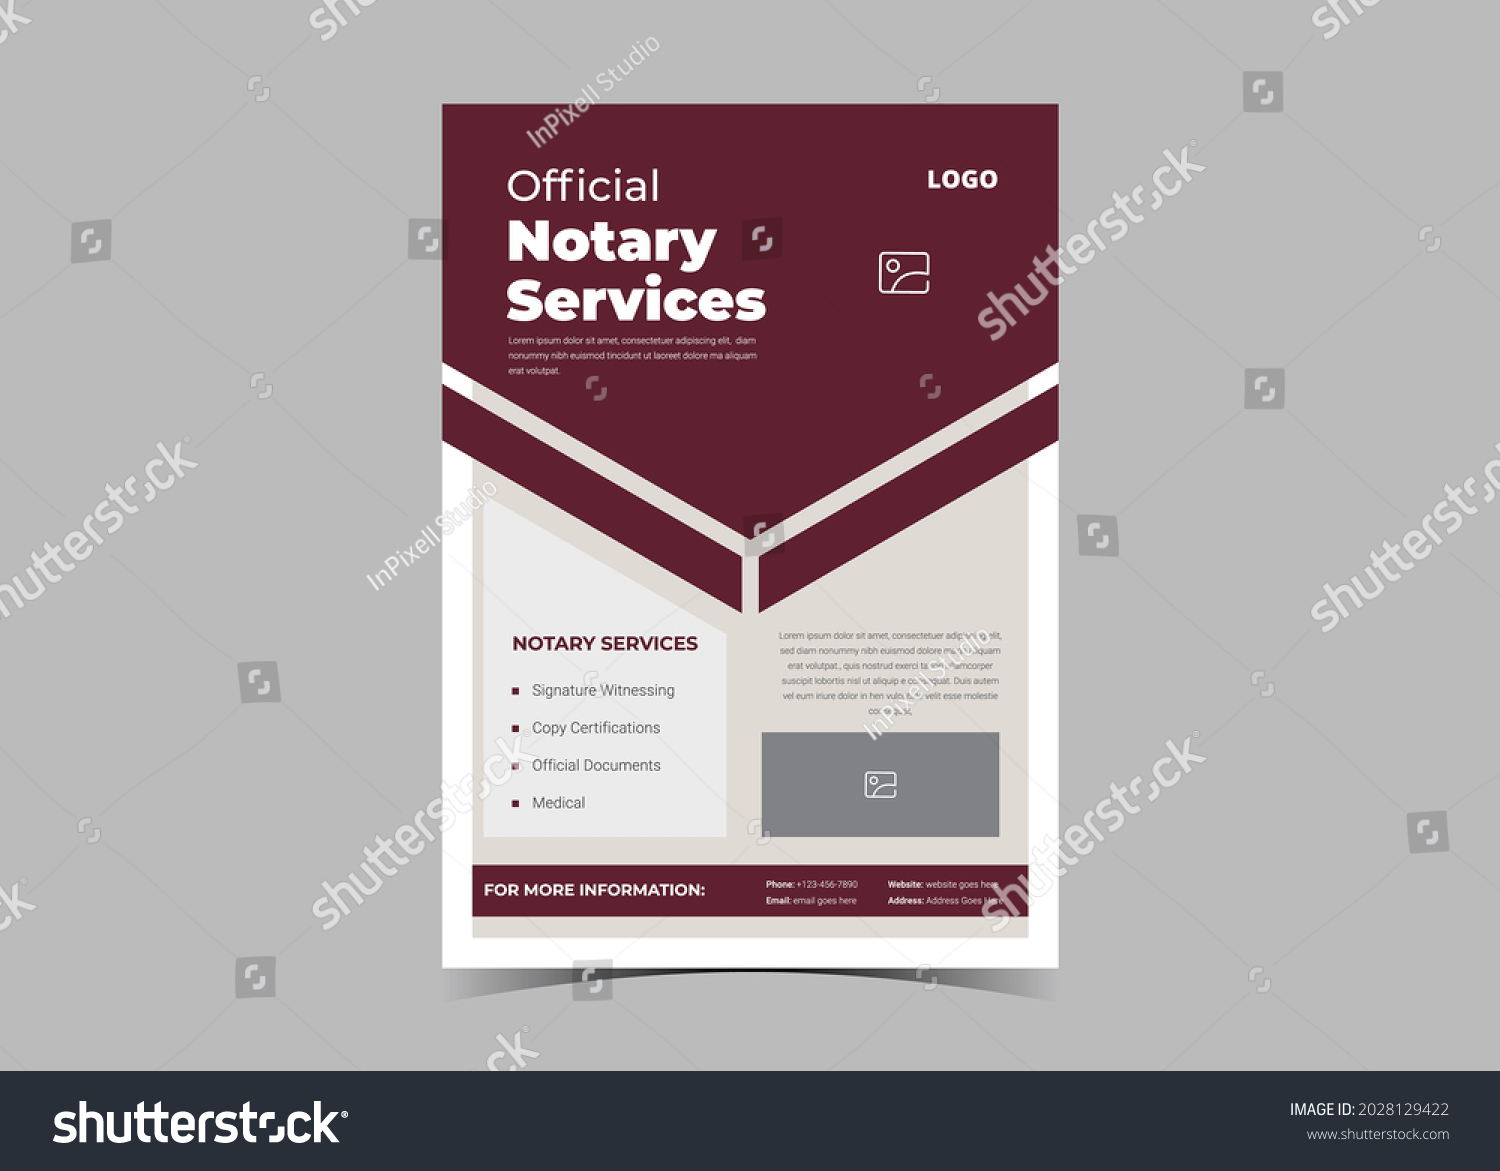 Notary service flyer template design. Lawyer notary service poster leaflet design. Legal document signing service flyer poster template #2028129422